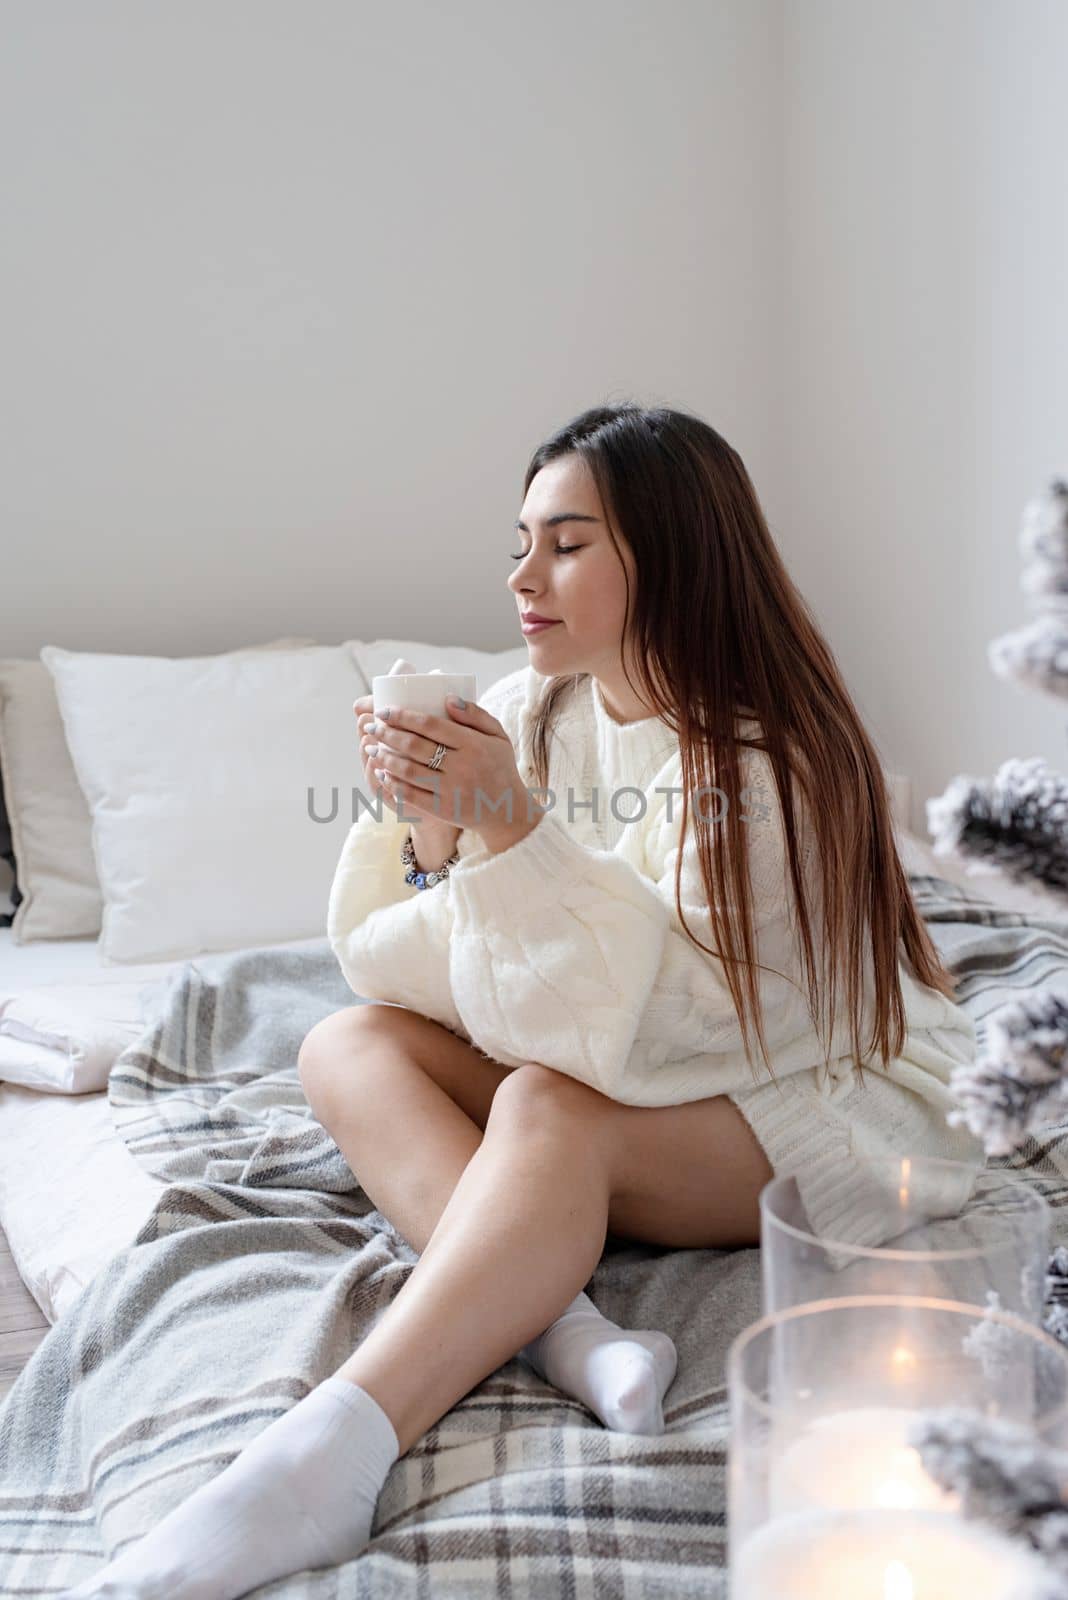 Merry Christmas and Happy New Year. Woman in warm white winter sweater lying in bed at home at christmas eve holding cup with marshmallows, fir tree behind